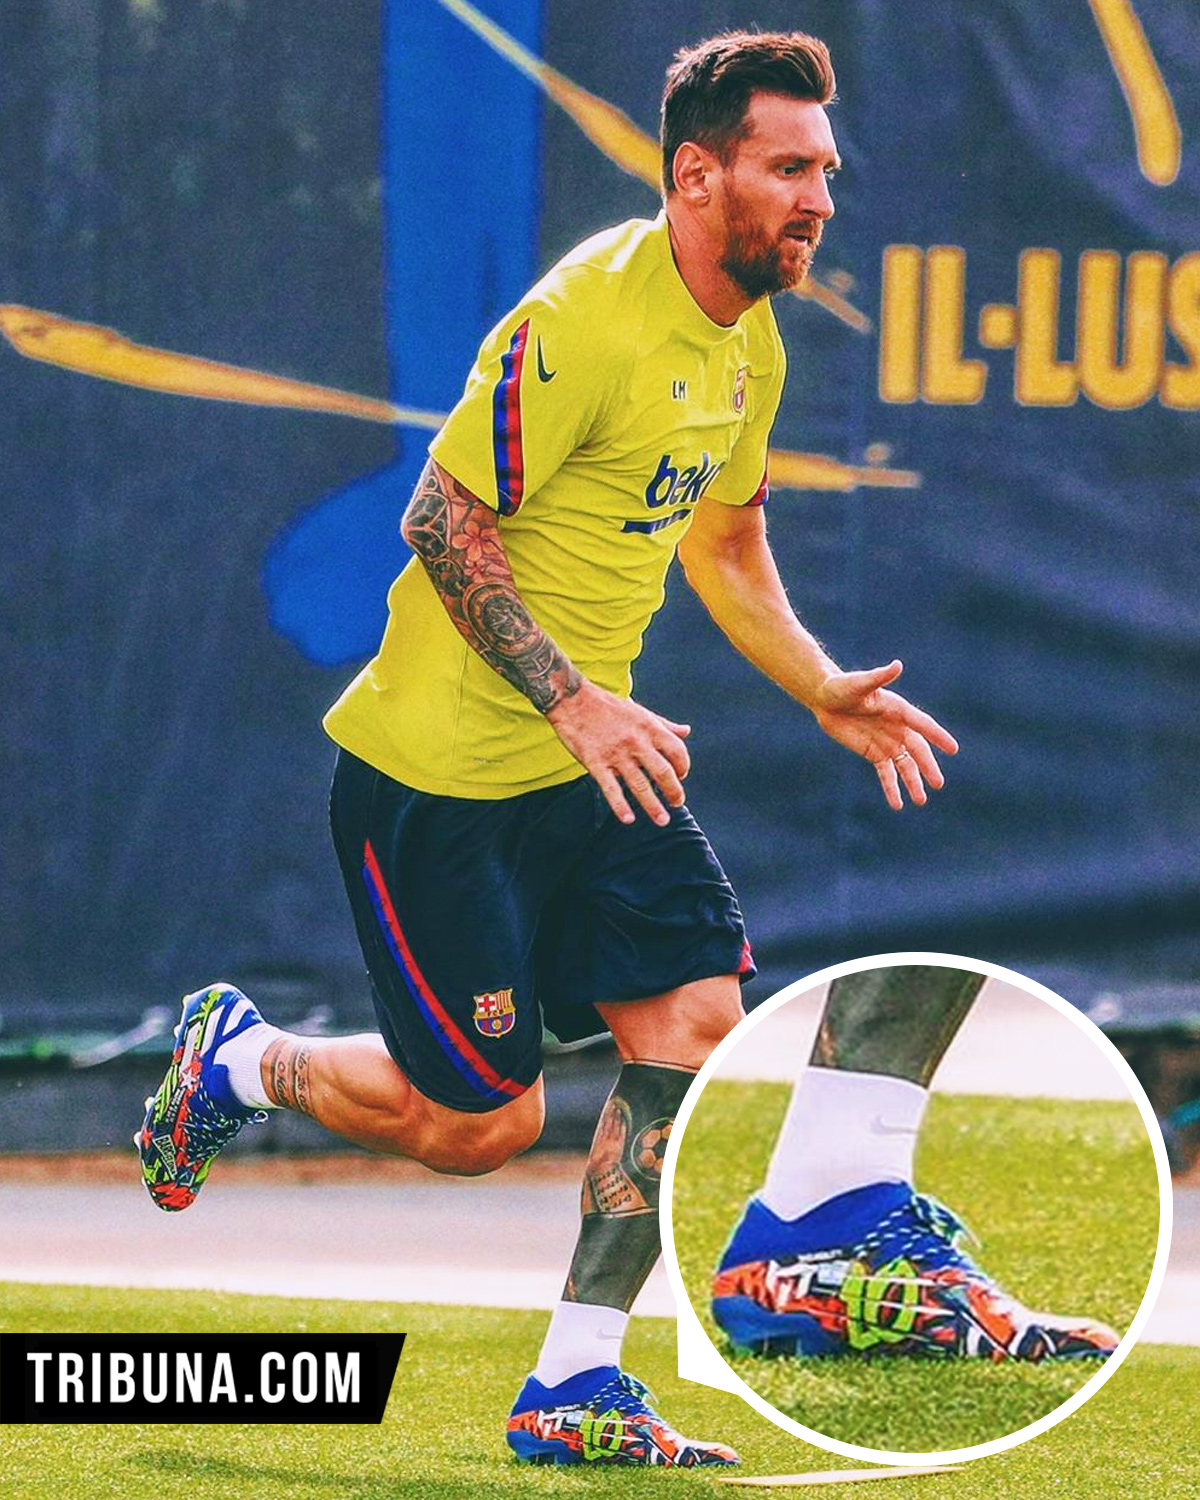 messi new boots